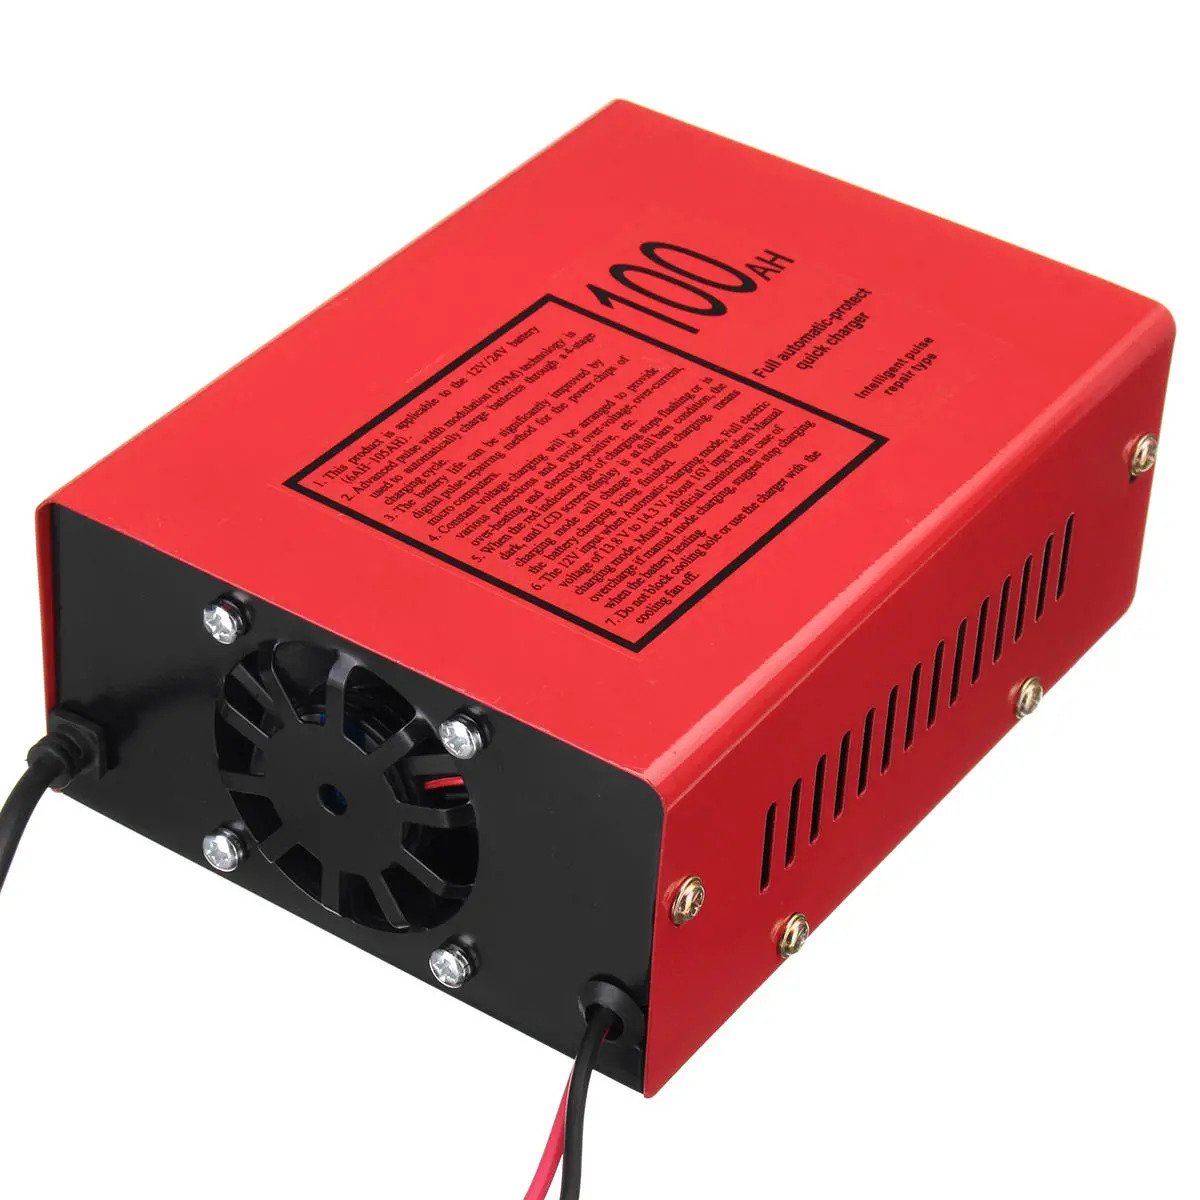 100AH Full Automatic Quick Battery Charger 12V & 24V